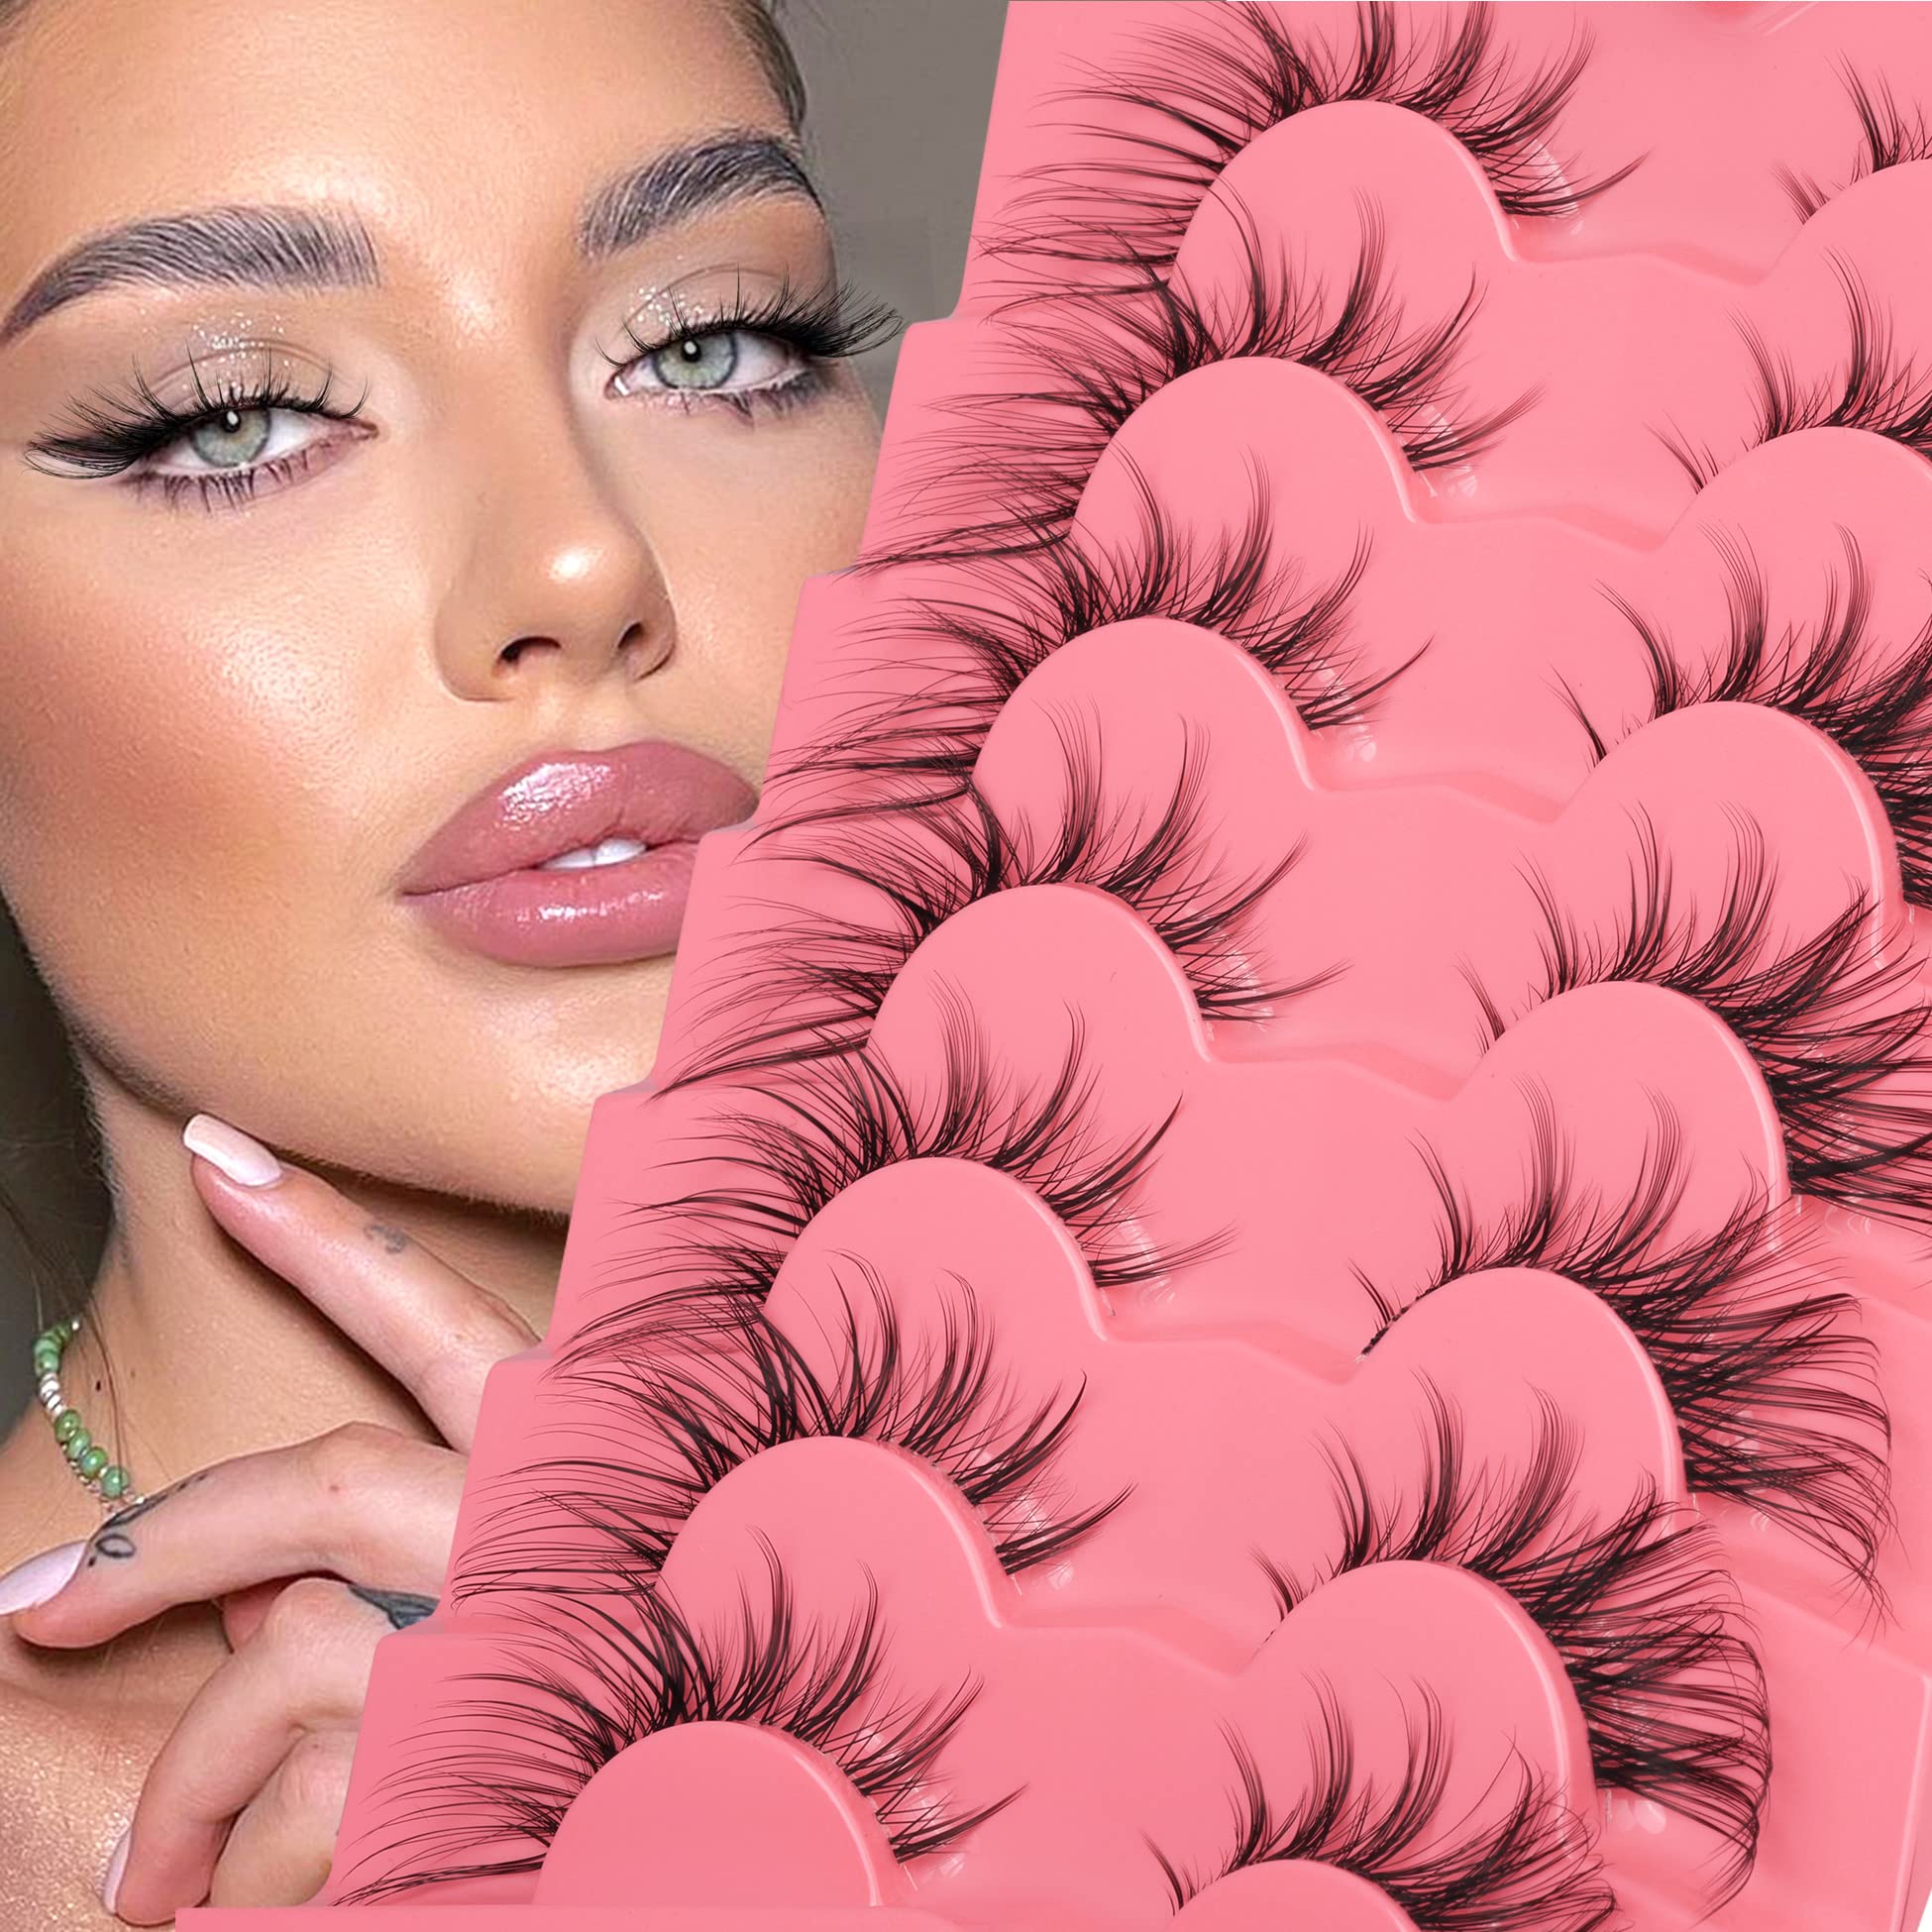 Manga Lashes Fluffy Faux Mink Lashes 14 Pairs Natural False Lashes Pack  Wispy Short Anime Lashes Look Like Individual Clusters| 3D1009